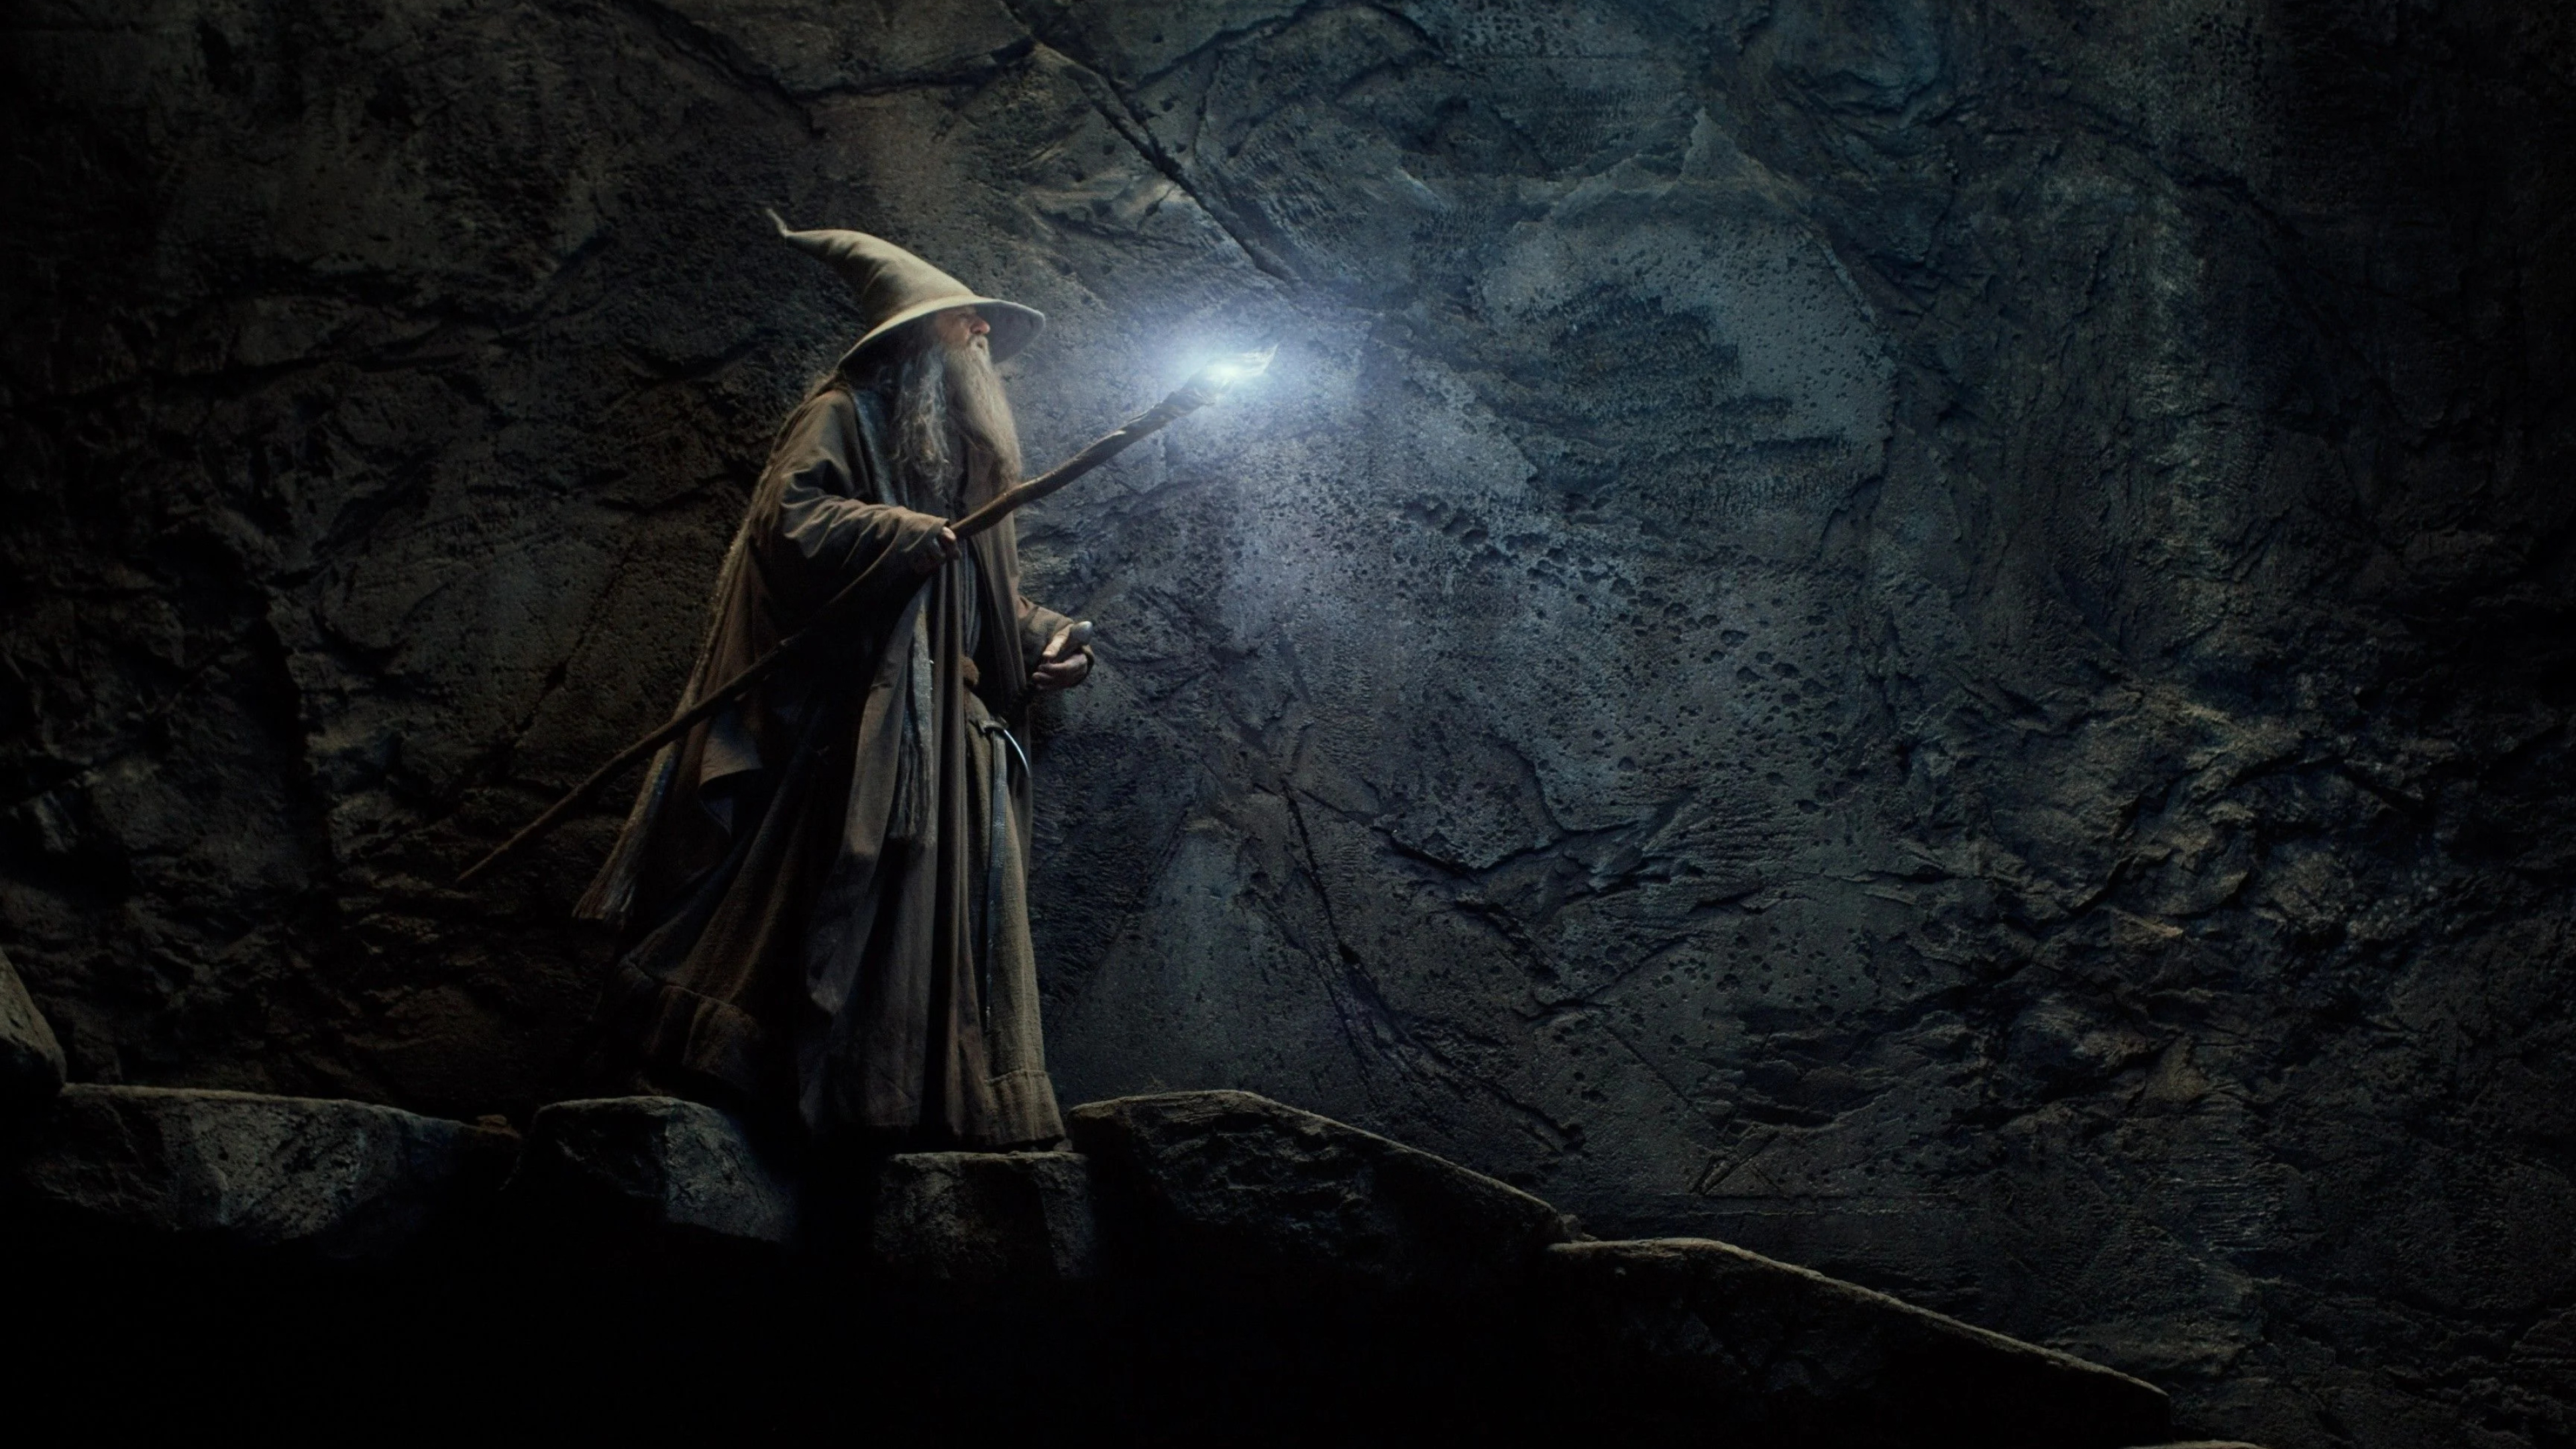 Lord of the Rings Gandalf wallpapers, Stunning visuals, Top-quality images, Desktop background, 3840x2160 4K Desktop